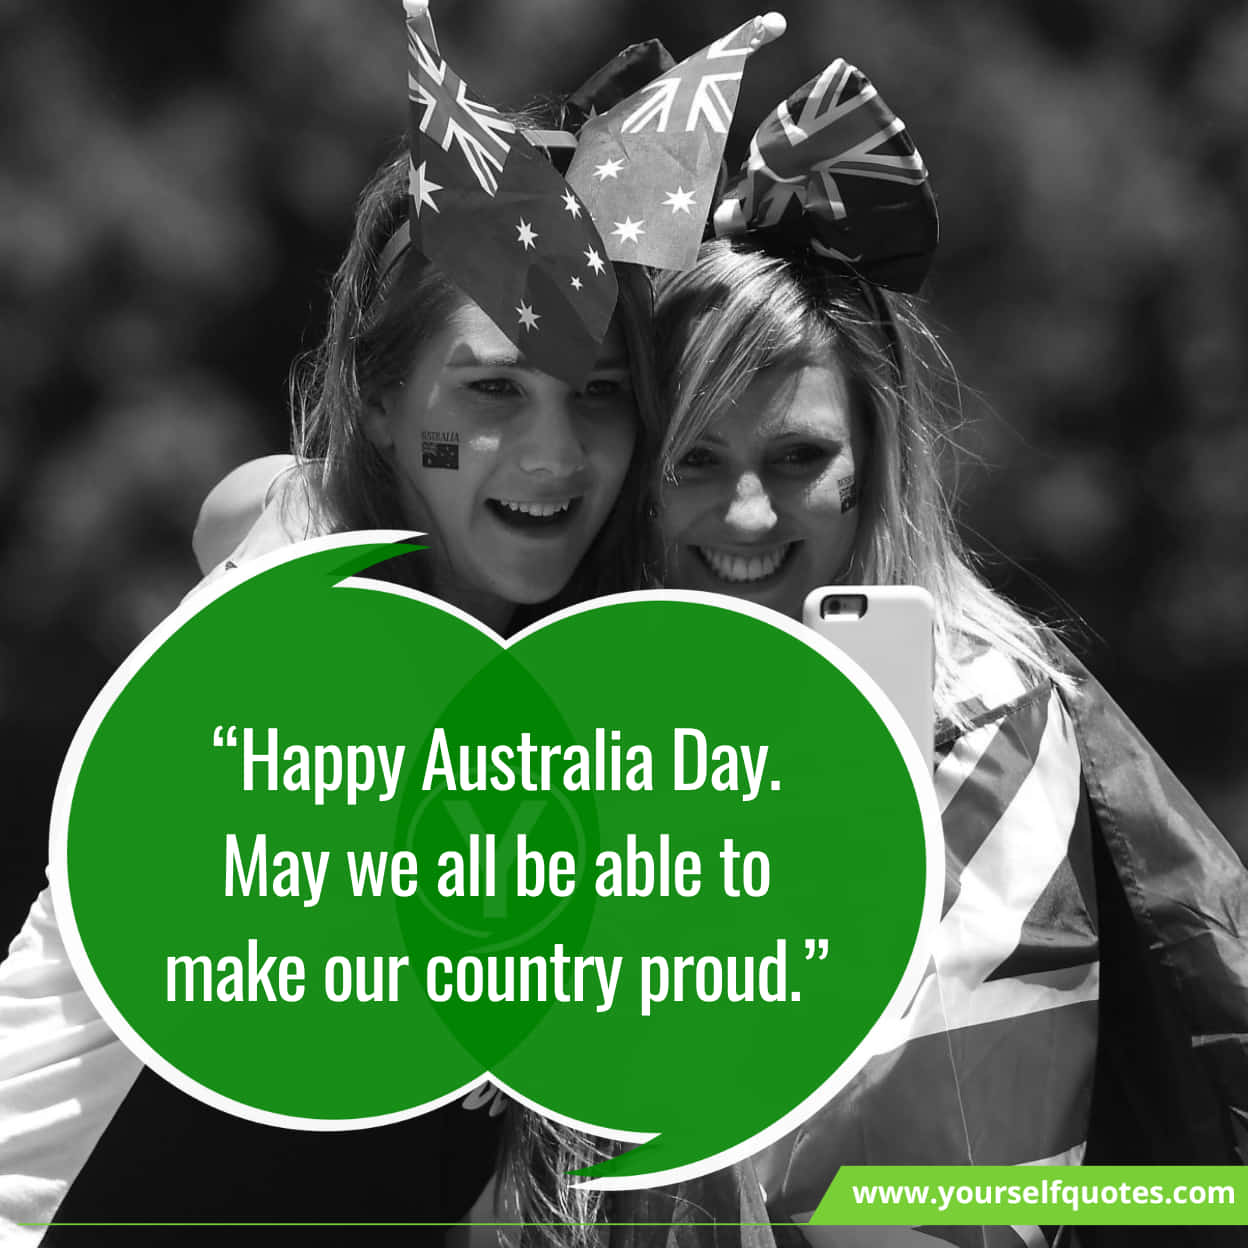 Australia Day Wishes, Messages and Quotes